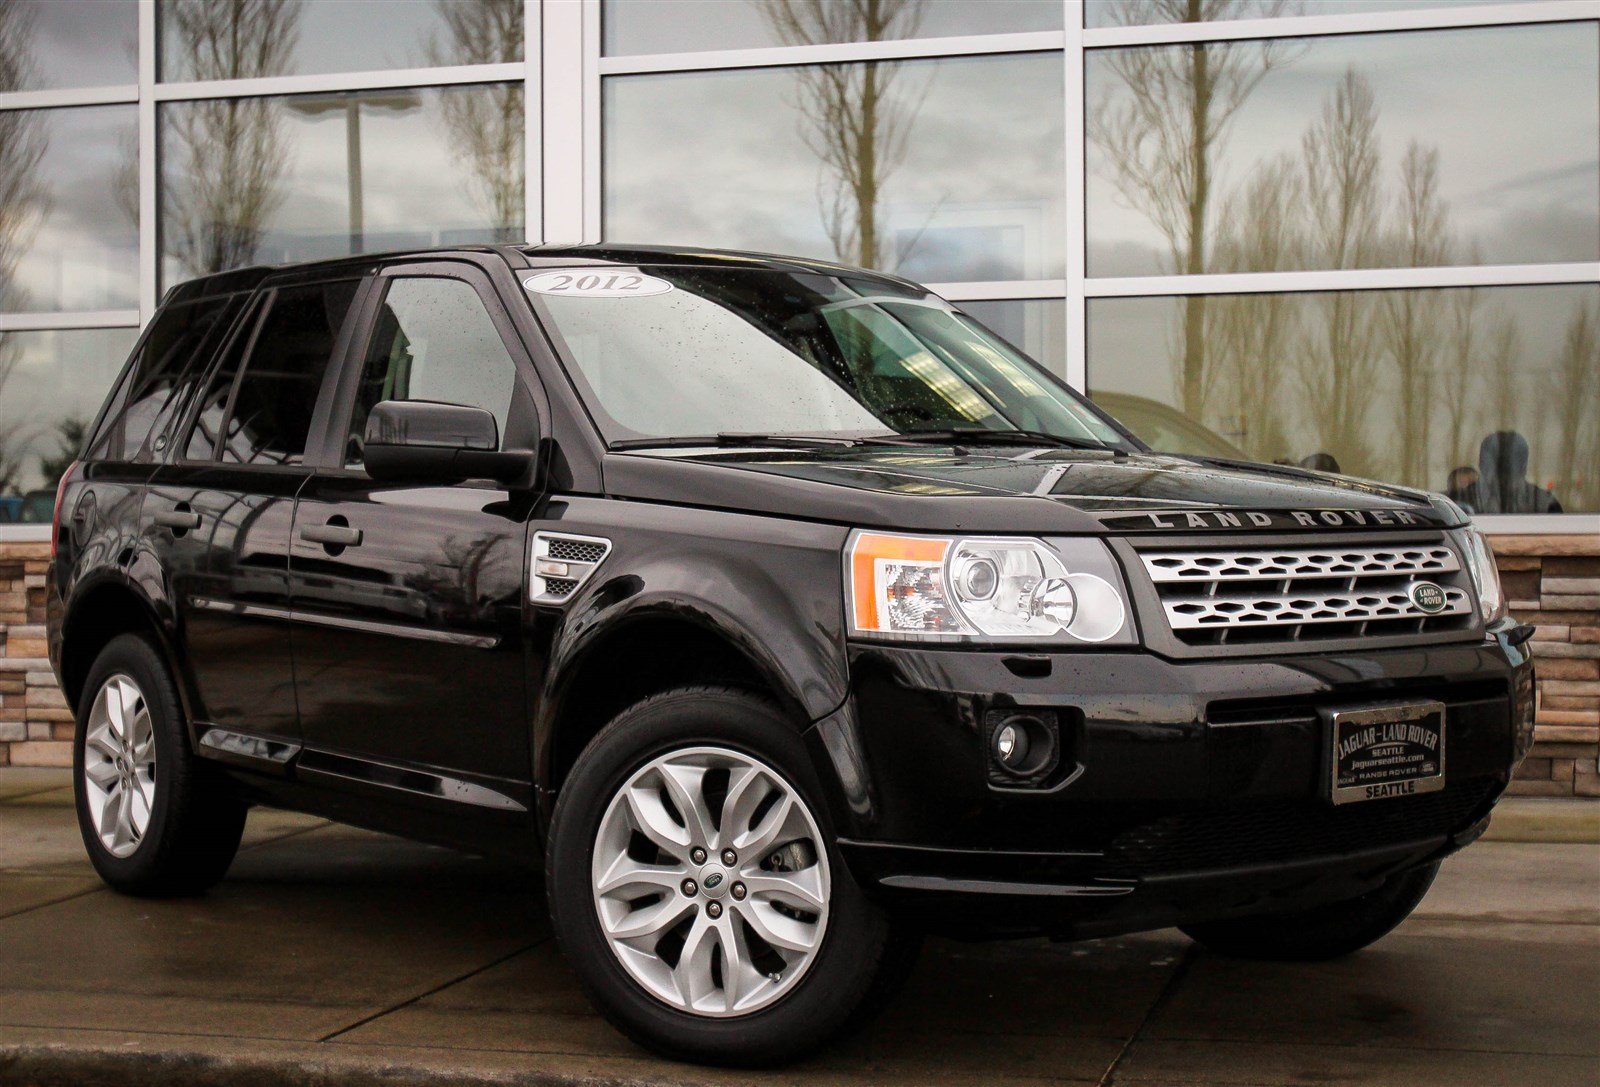 Pre-Owned 2012 Land Rover LR2 HSE Sport Utility in Bellevue #21647A